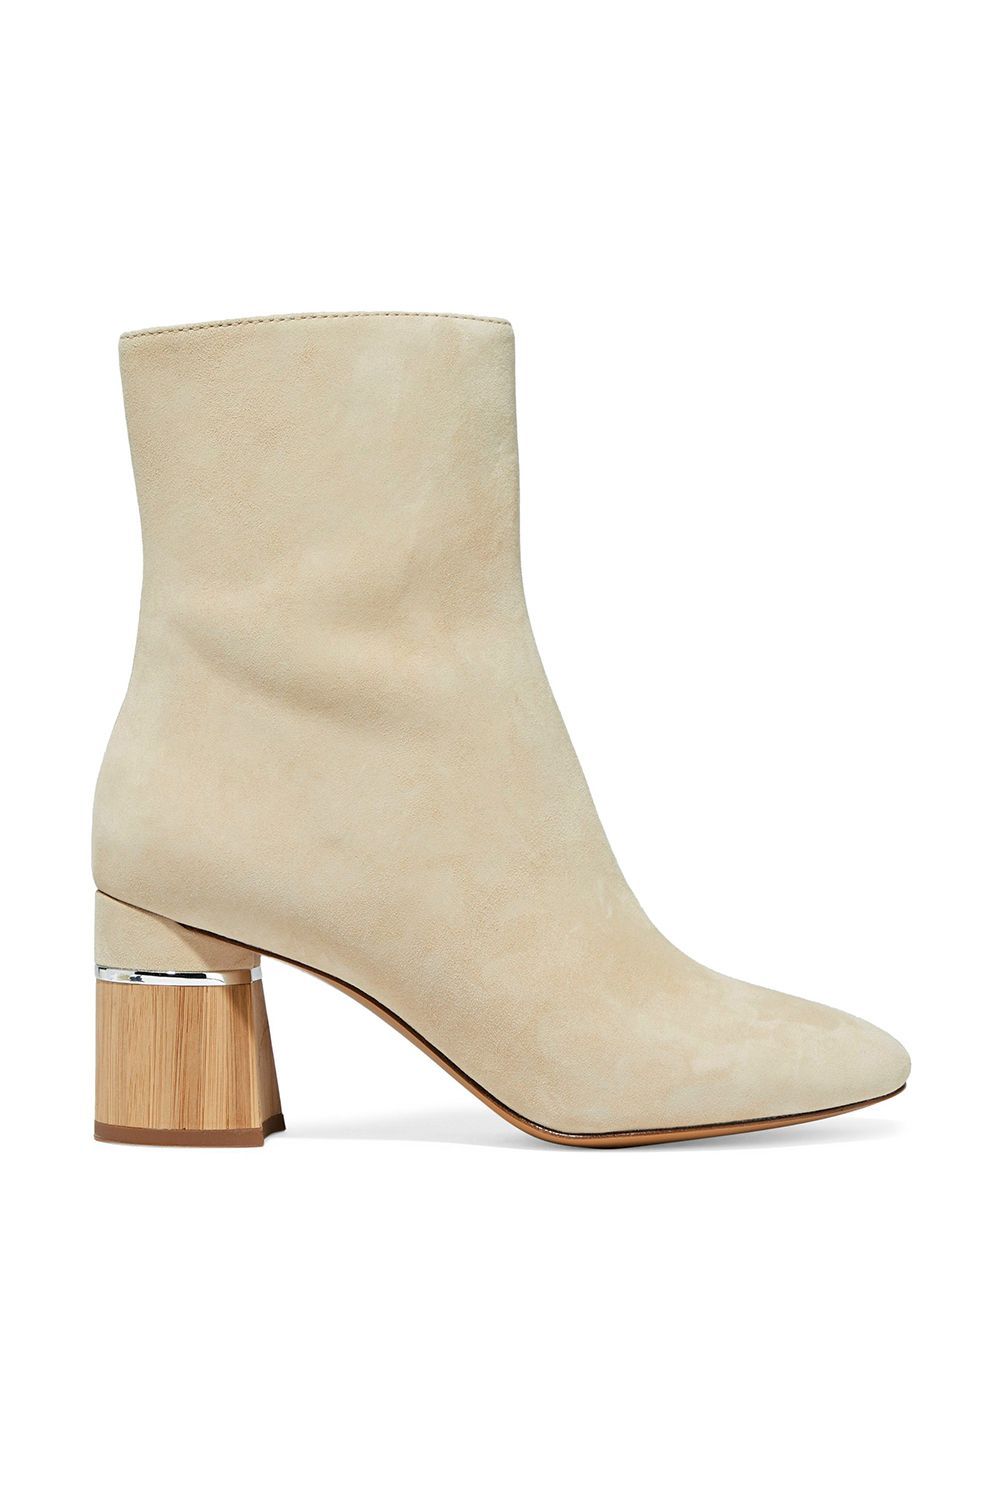 outnet mules